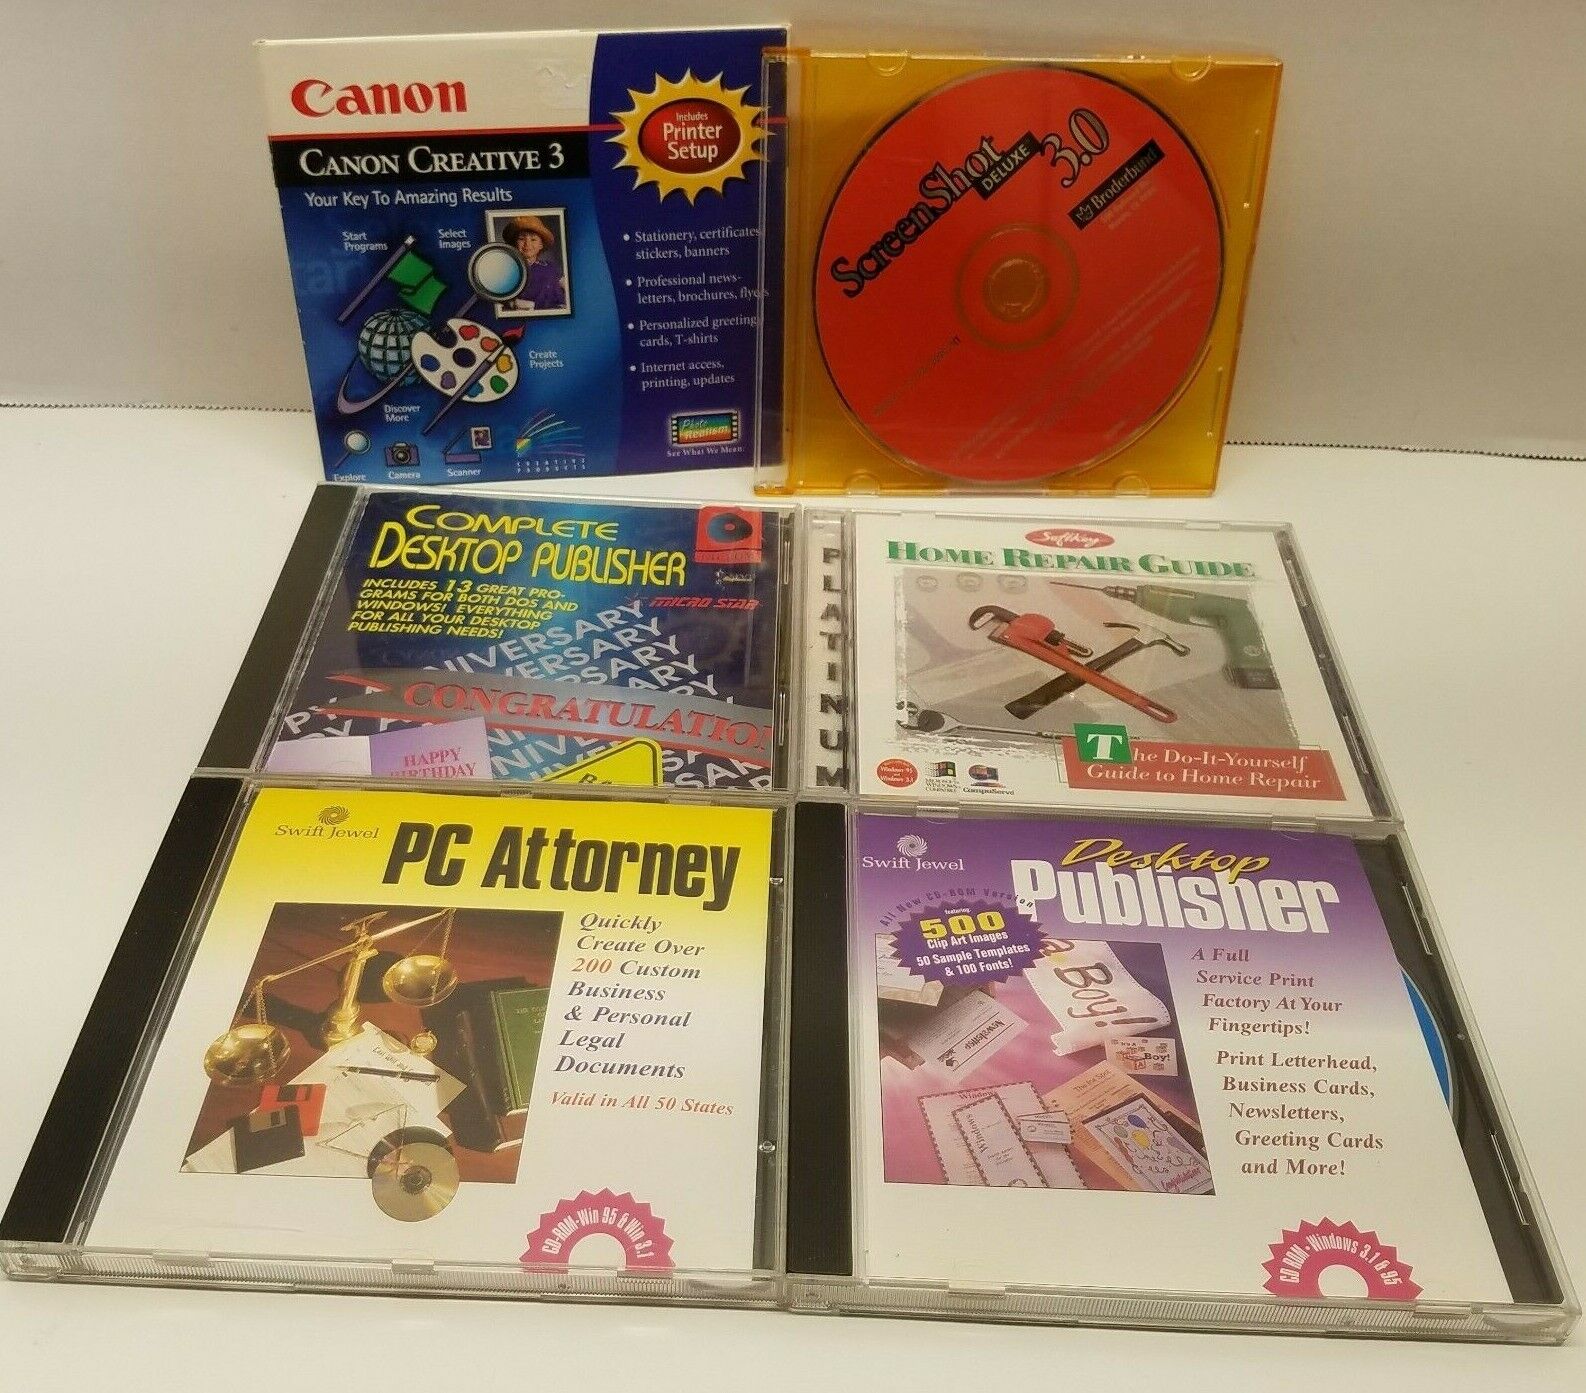 6 VTG PC How To Software CDs Lot 90s/2000s Canon, law, Home Repair, Publisher, +